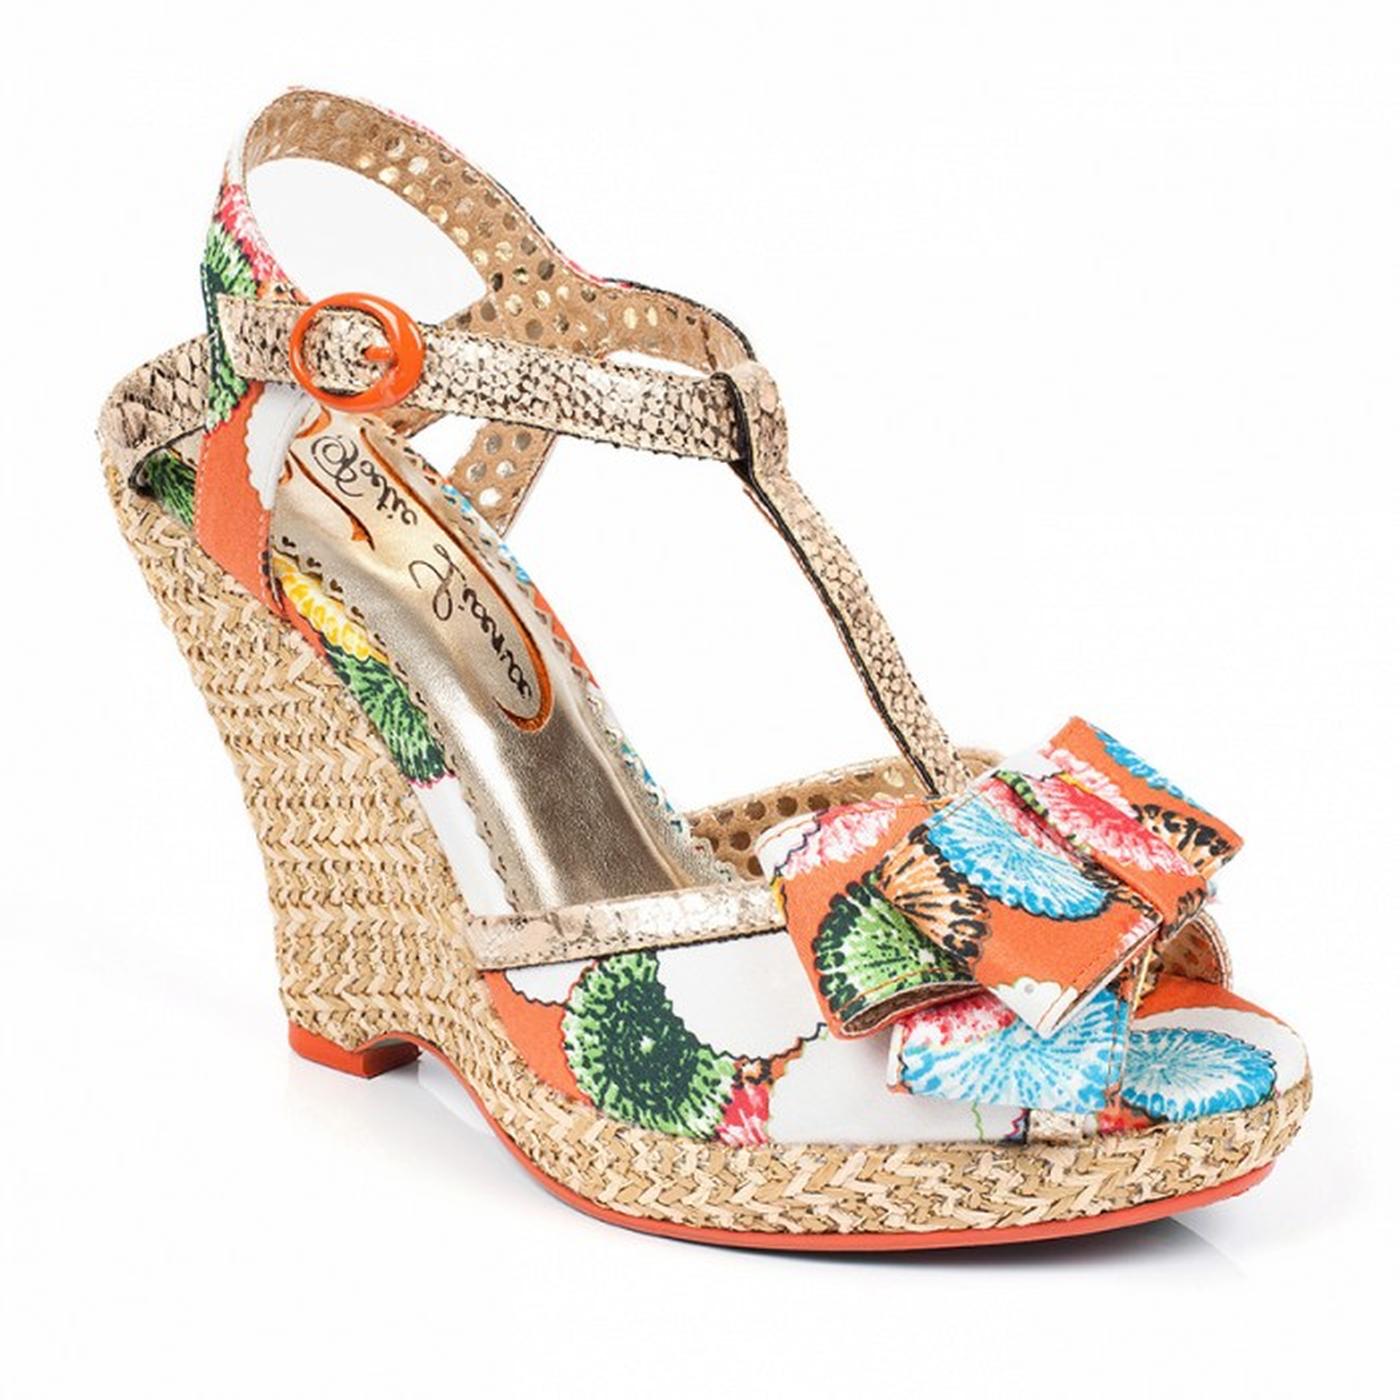 POETIC LICENCE Behave Yourself Retro Vintage Wedge Sandals